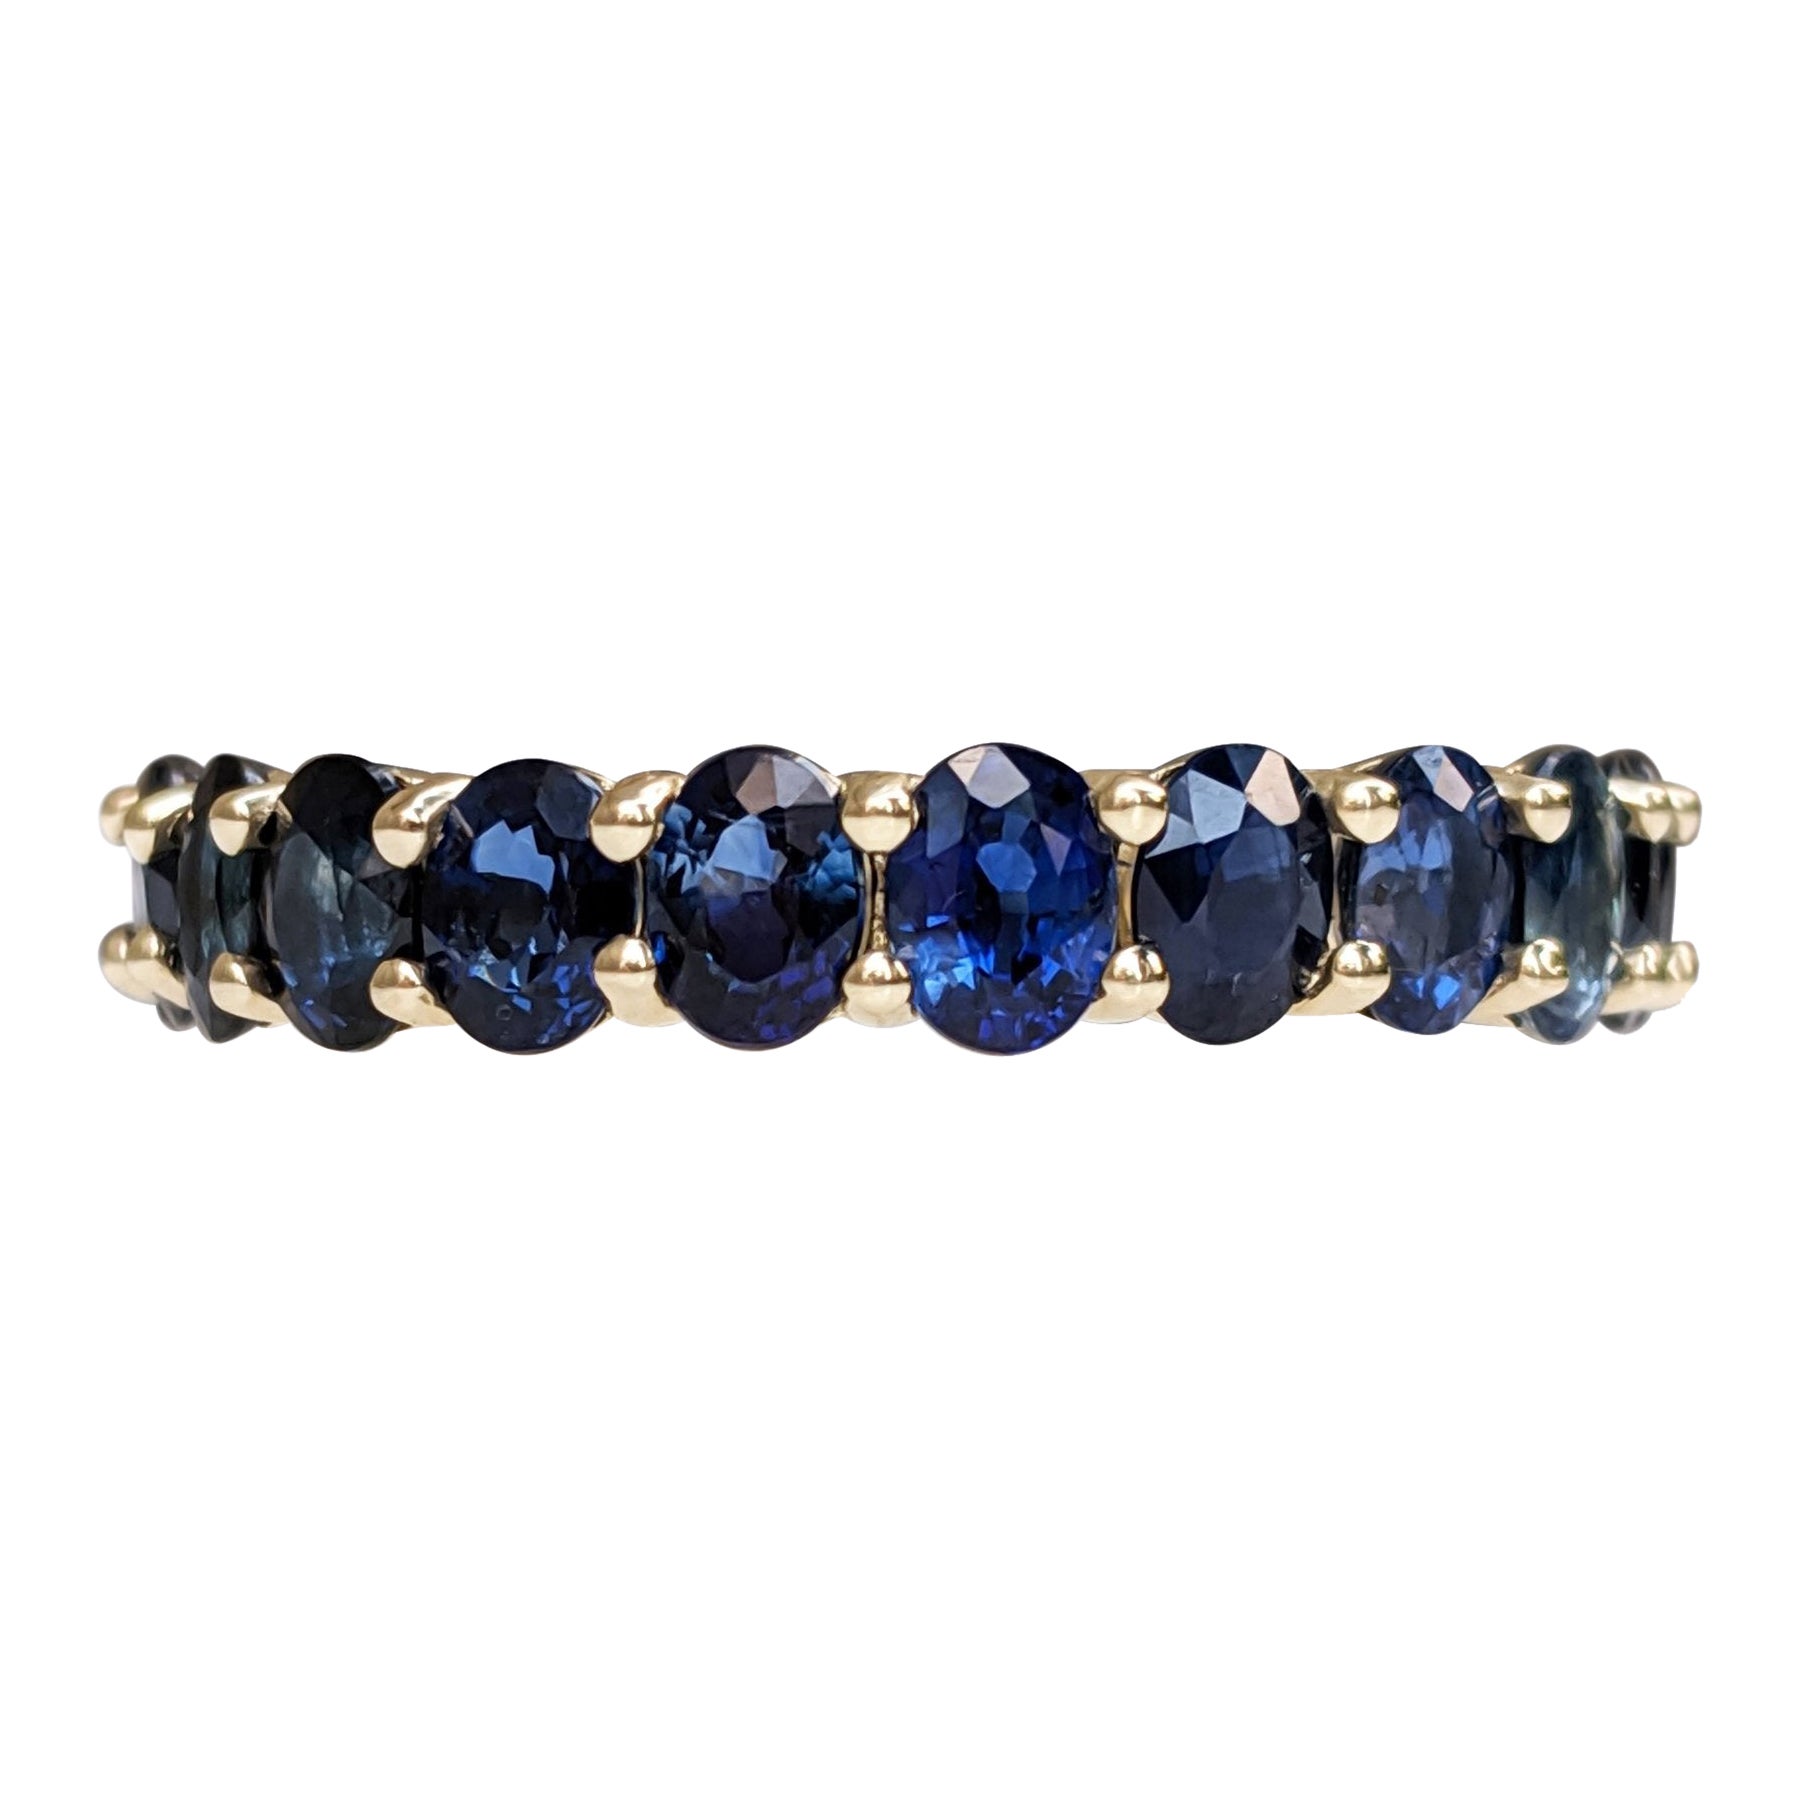 NO RESERVE! 5.22Ct Sapphire Eternity Band - Sapphire - 14kt Yellow gold - Ring